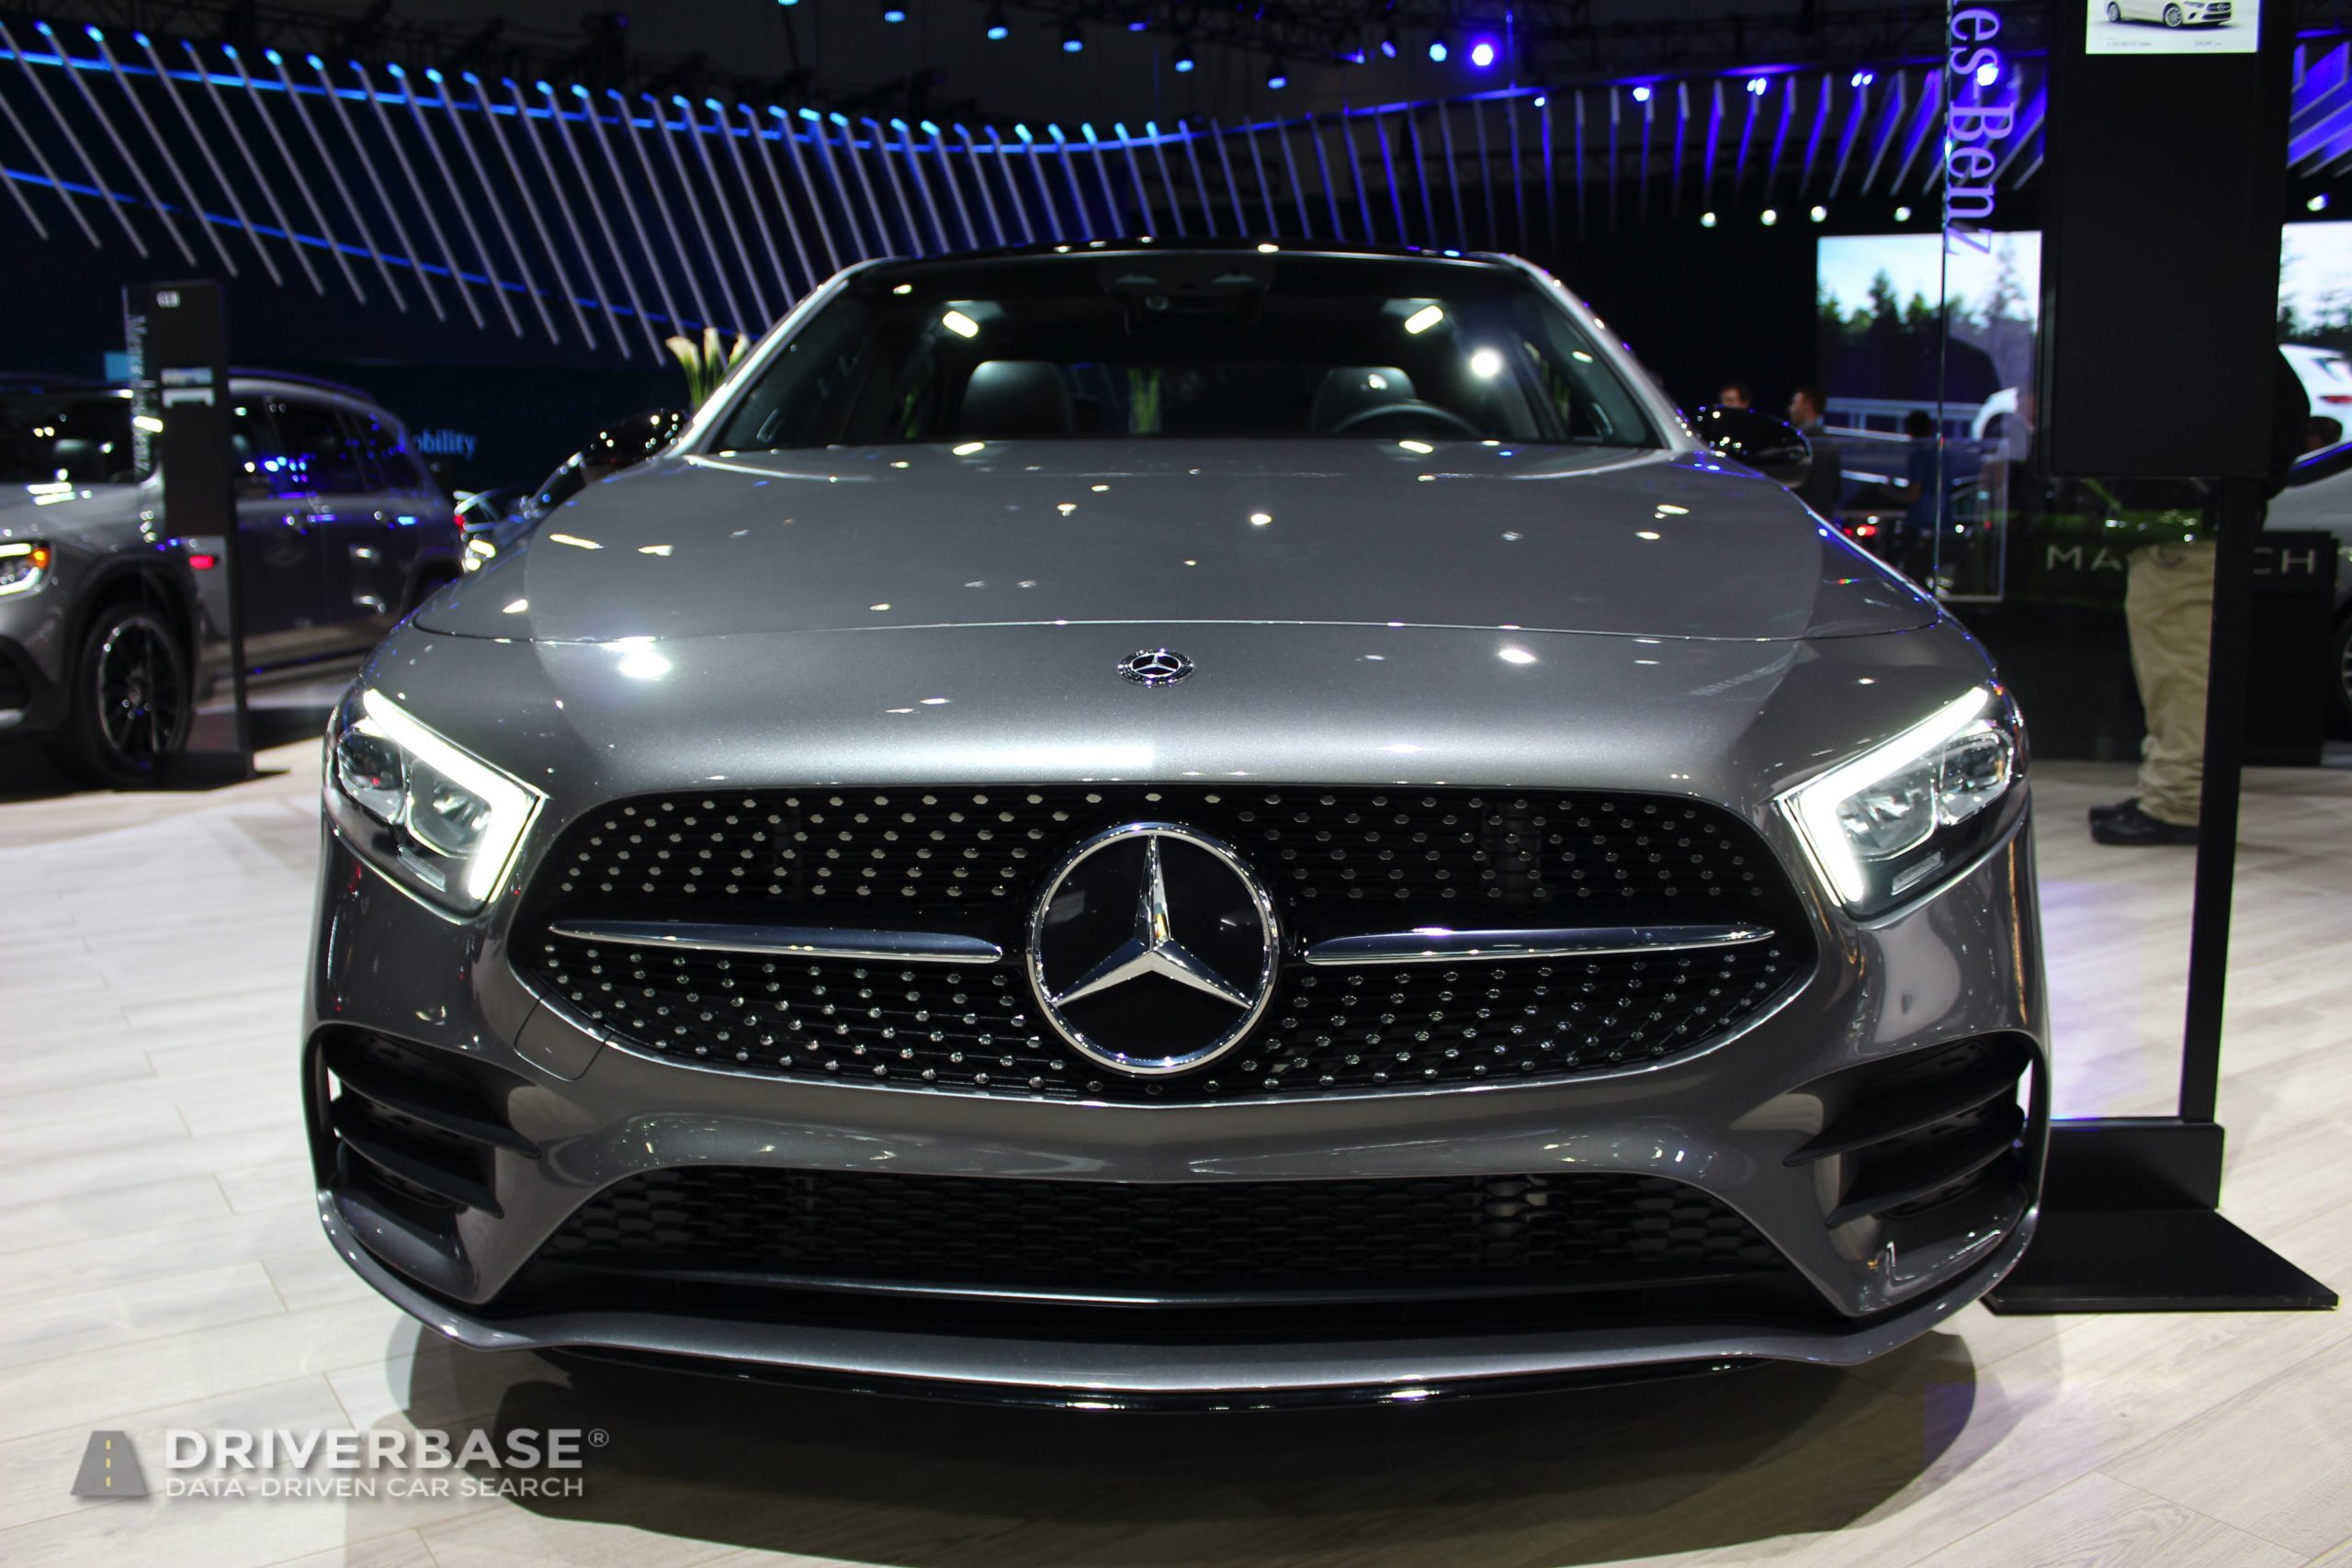 2020 Mercedes-Benz A 220 at the 2019 Los Angeles Auto Show